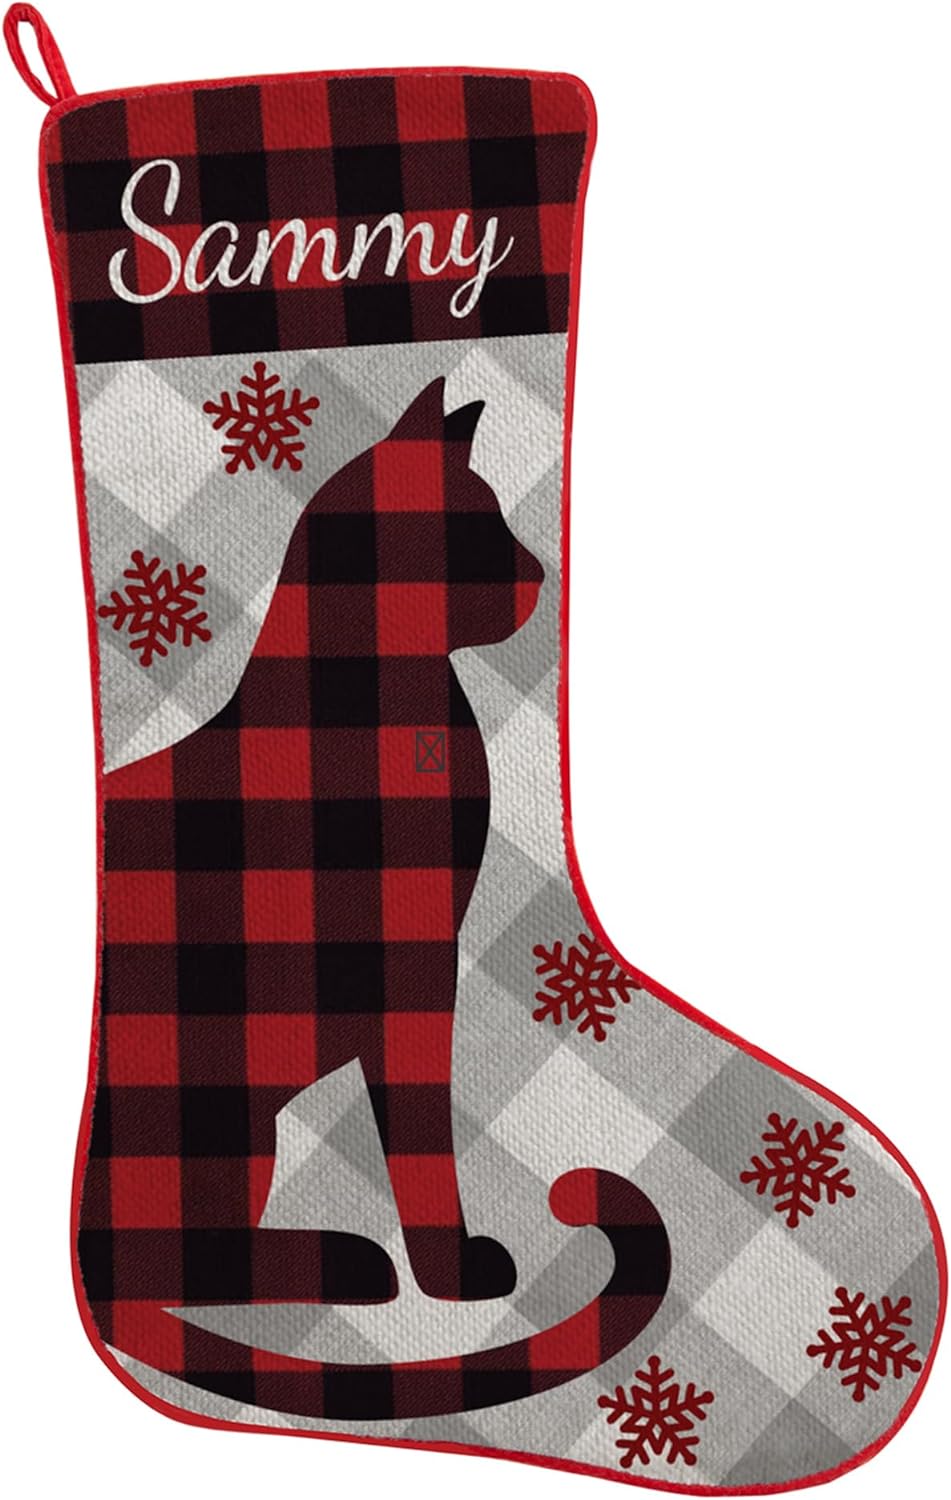 Let’s Make Memories Personalized Perfectly Plaid Christmas Stocking